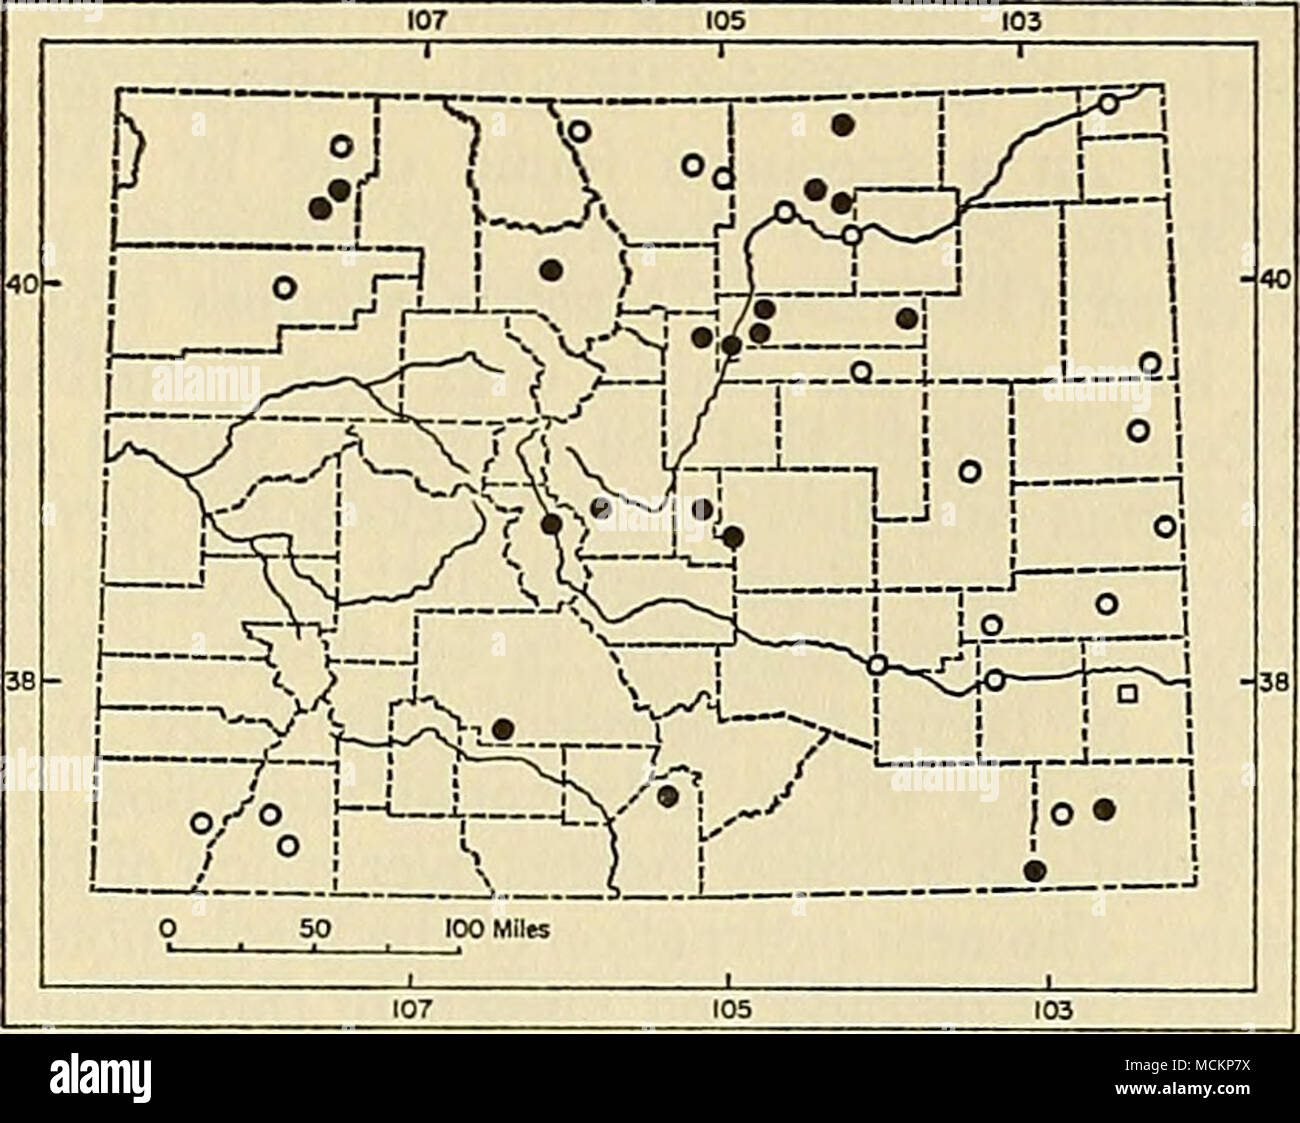 . Fig. 101. Distribution of Mustela nigripes in Colorado. For explanation of symbols, see p. 9. Measurements.—External measurements of males from Adams and Teller counties and of females from El Paso and Baca counties are, respectively: 496, 492, 457, 458; 113, 100, 100, 90; 59, 63, 58, 57. Cranial measurements of a male and two females from Moffat County, females from Larimer and Park counties, and the above-mentioned four individuals include: condylobasal length, 65.9, 62.9, 65.1, 67.1, 66.7, 65.0, 65.5, 60.1, 63.0; zygomatic breadth, 41.5, 37.7, 38.7, 39.8, 40.0, 41.8, —, 36.3, 37.7; inter- Stock Photo